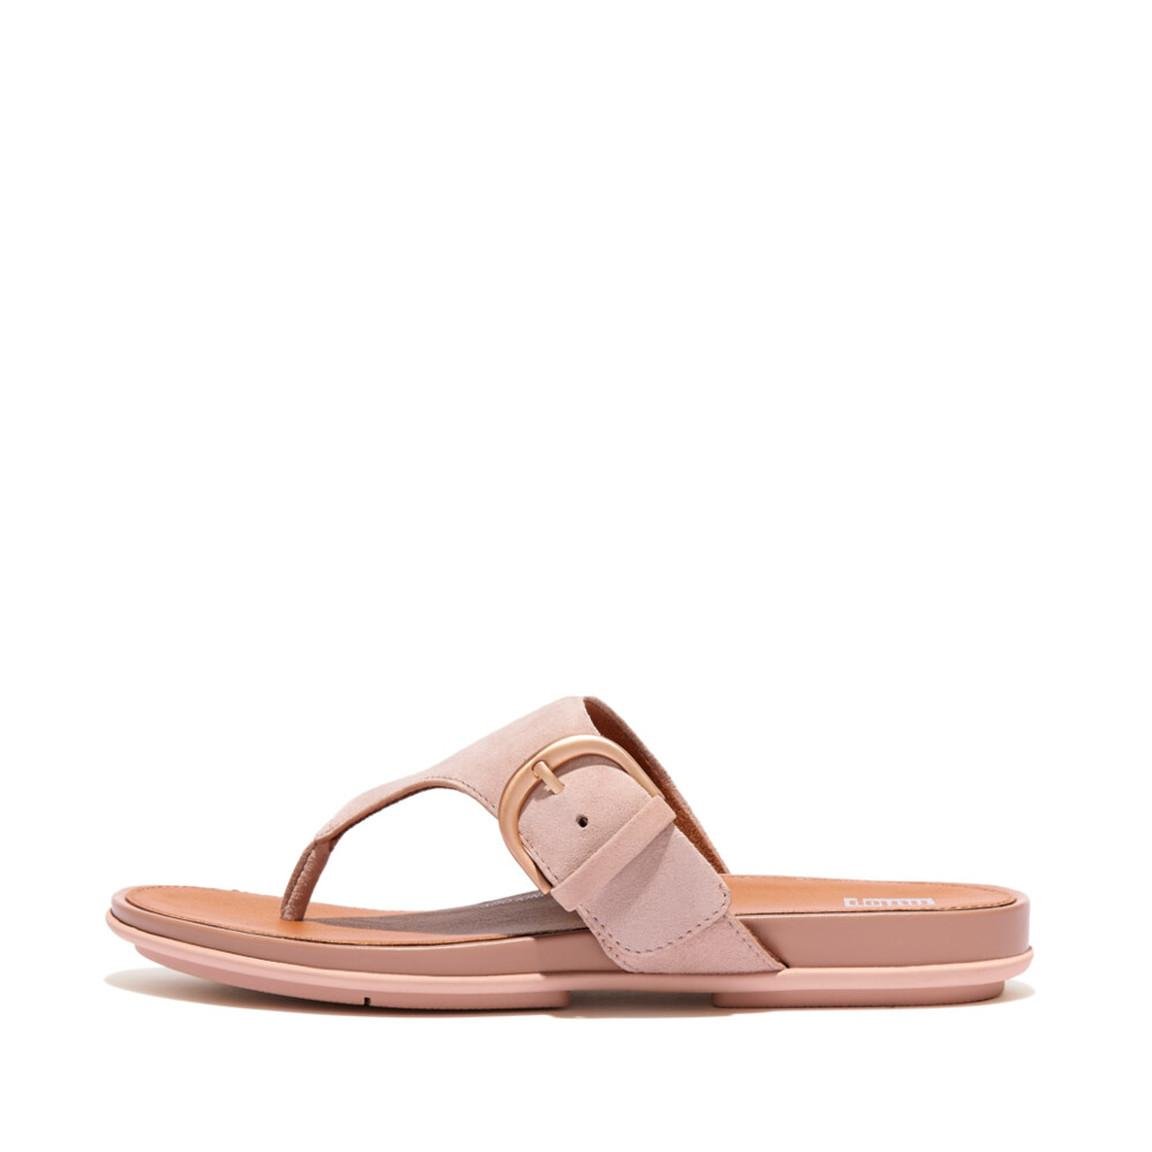 Buckle Toe-Post Sandals